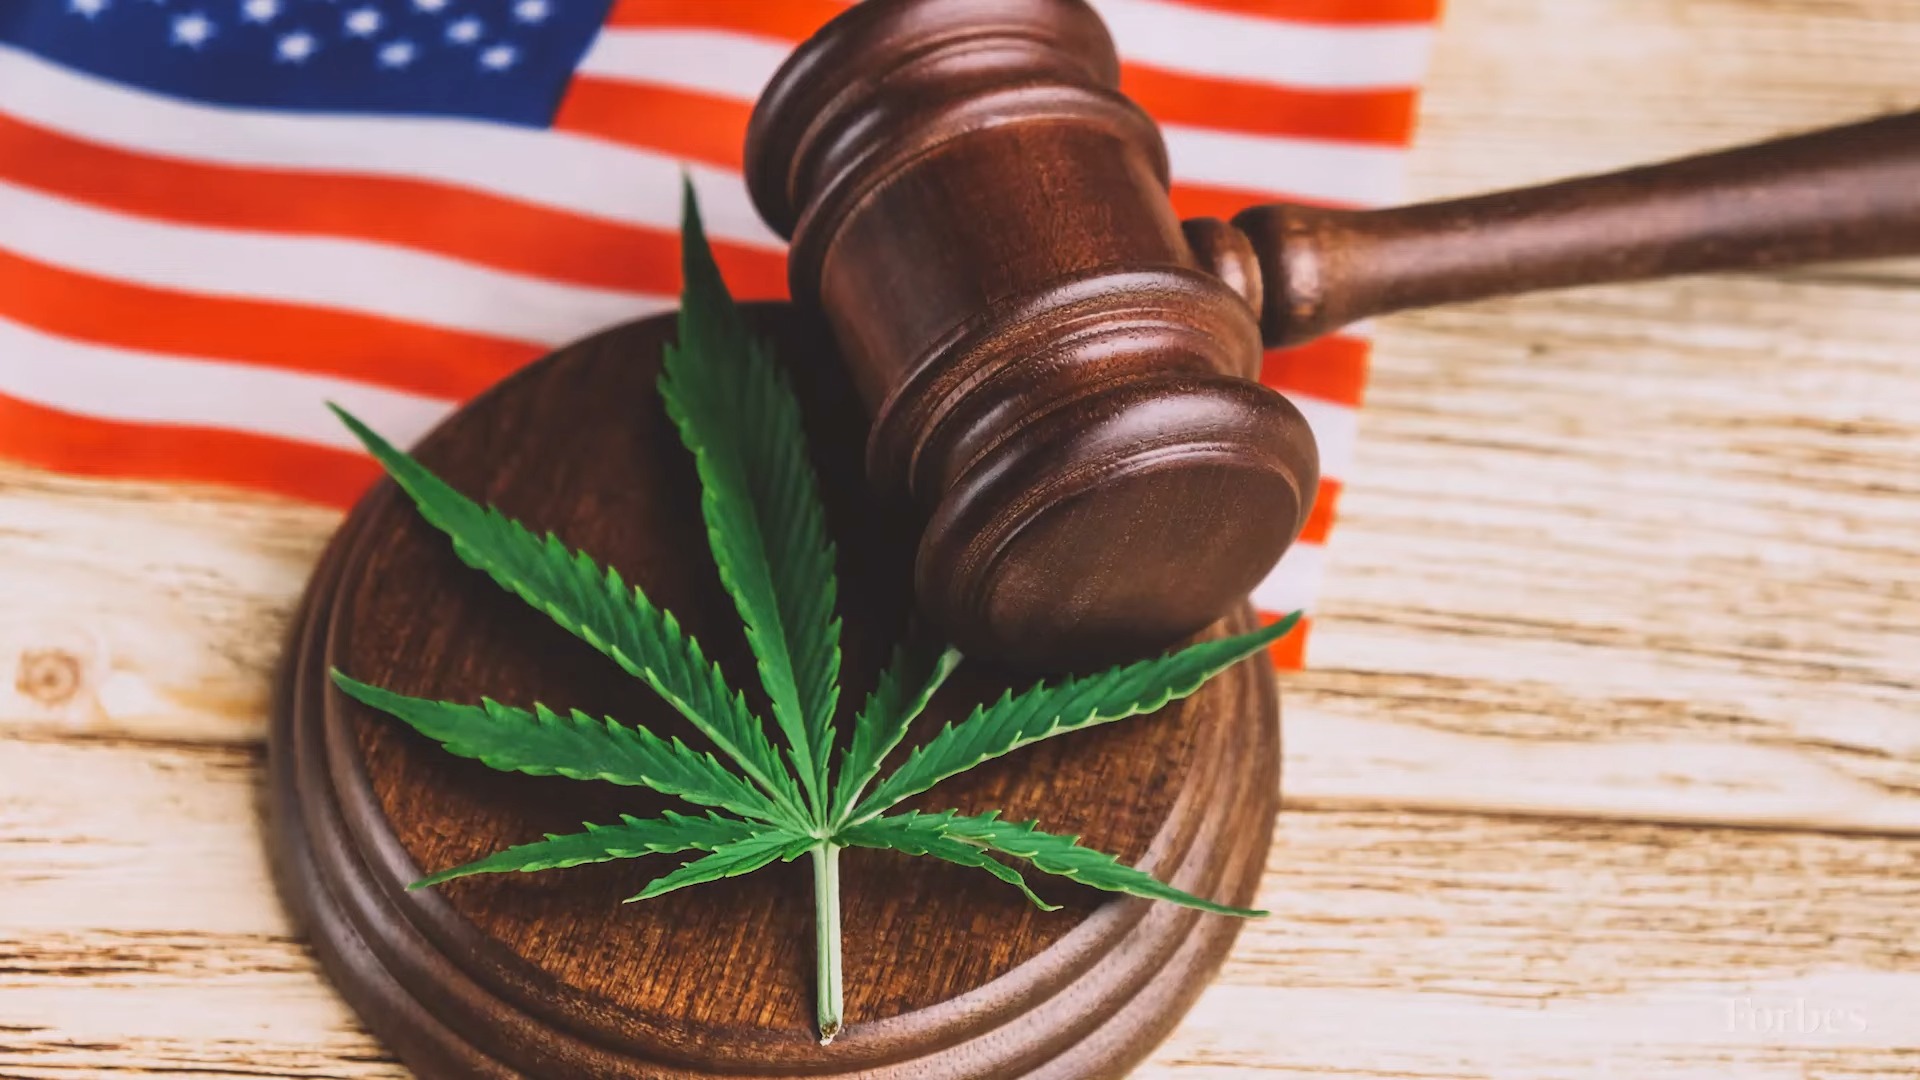 Cannabis Law - Federal vs State